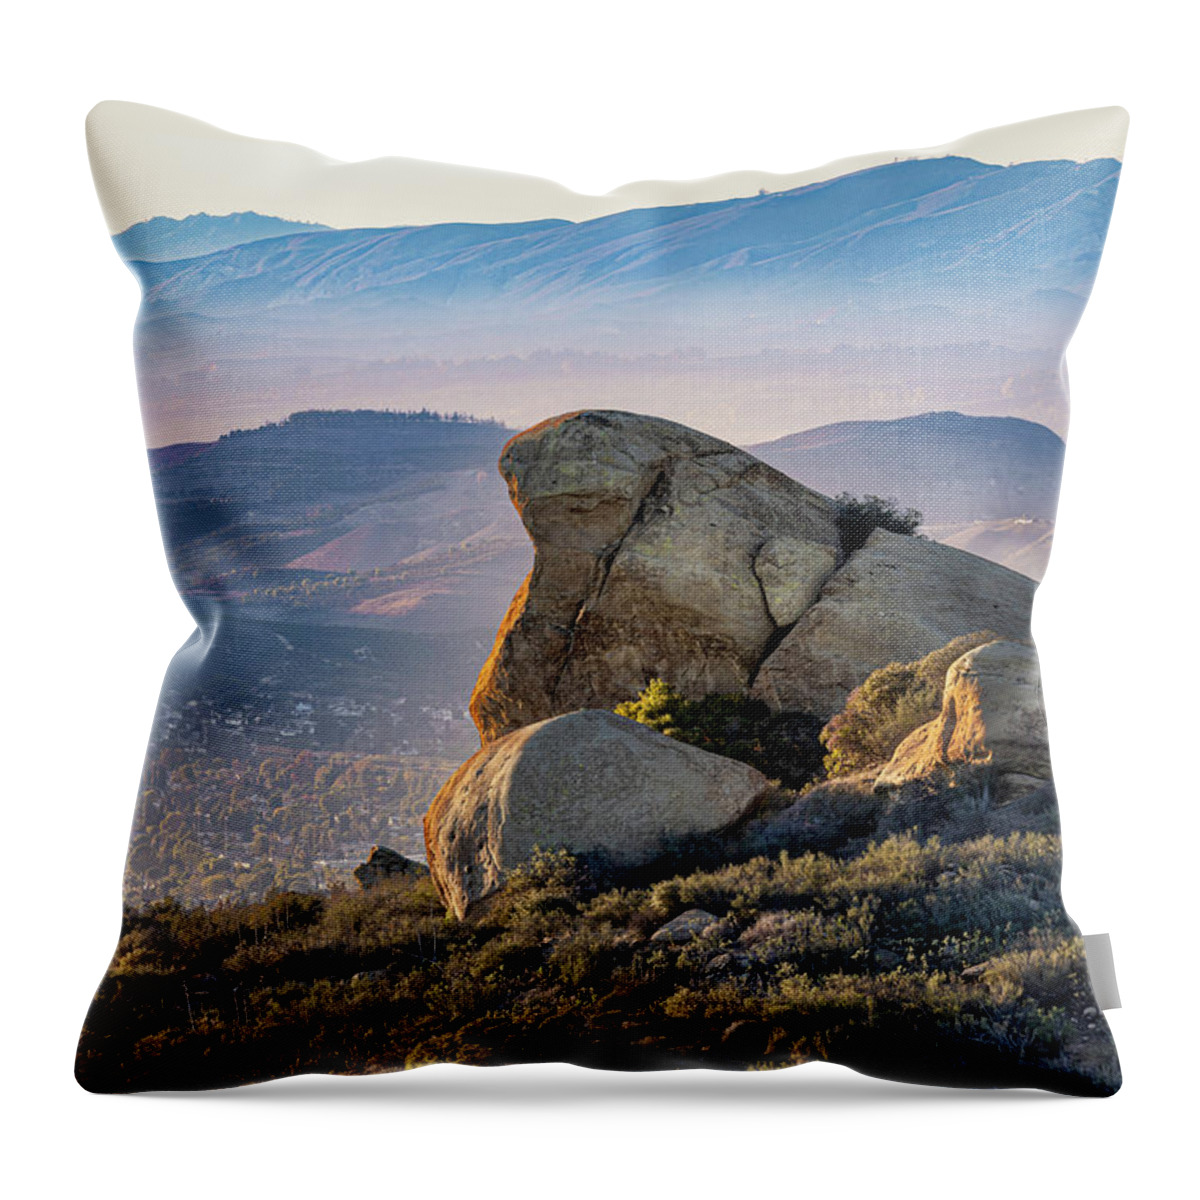 Turtle Rock Afternoon Throw Pillow featuring the photograph Turtle Rock Afternoon by Endre Balogh